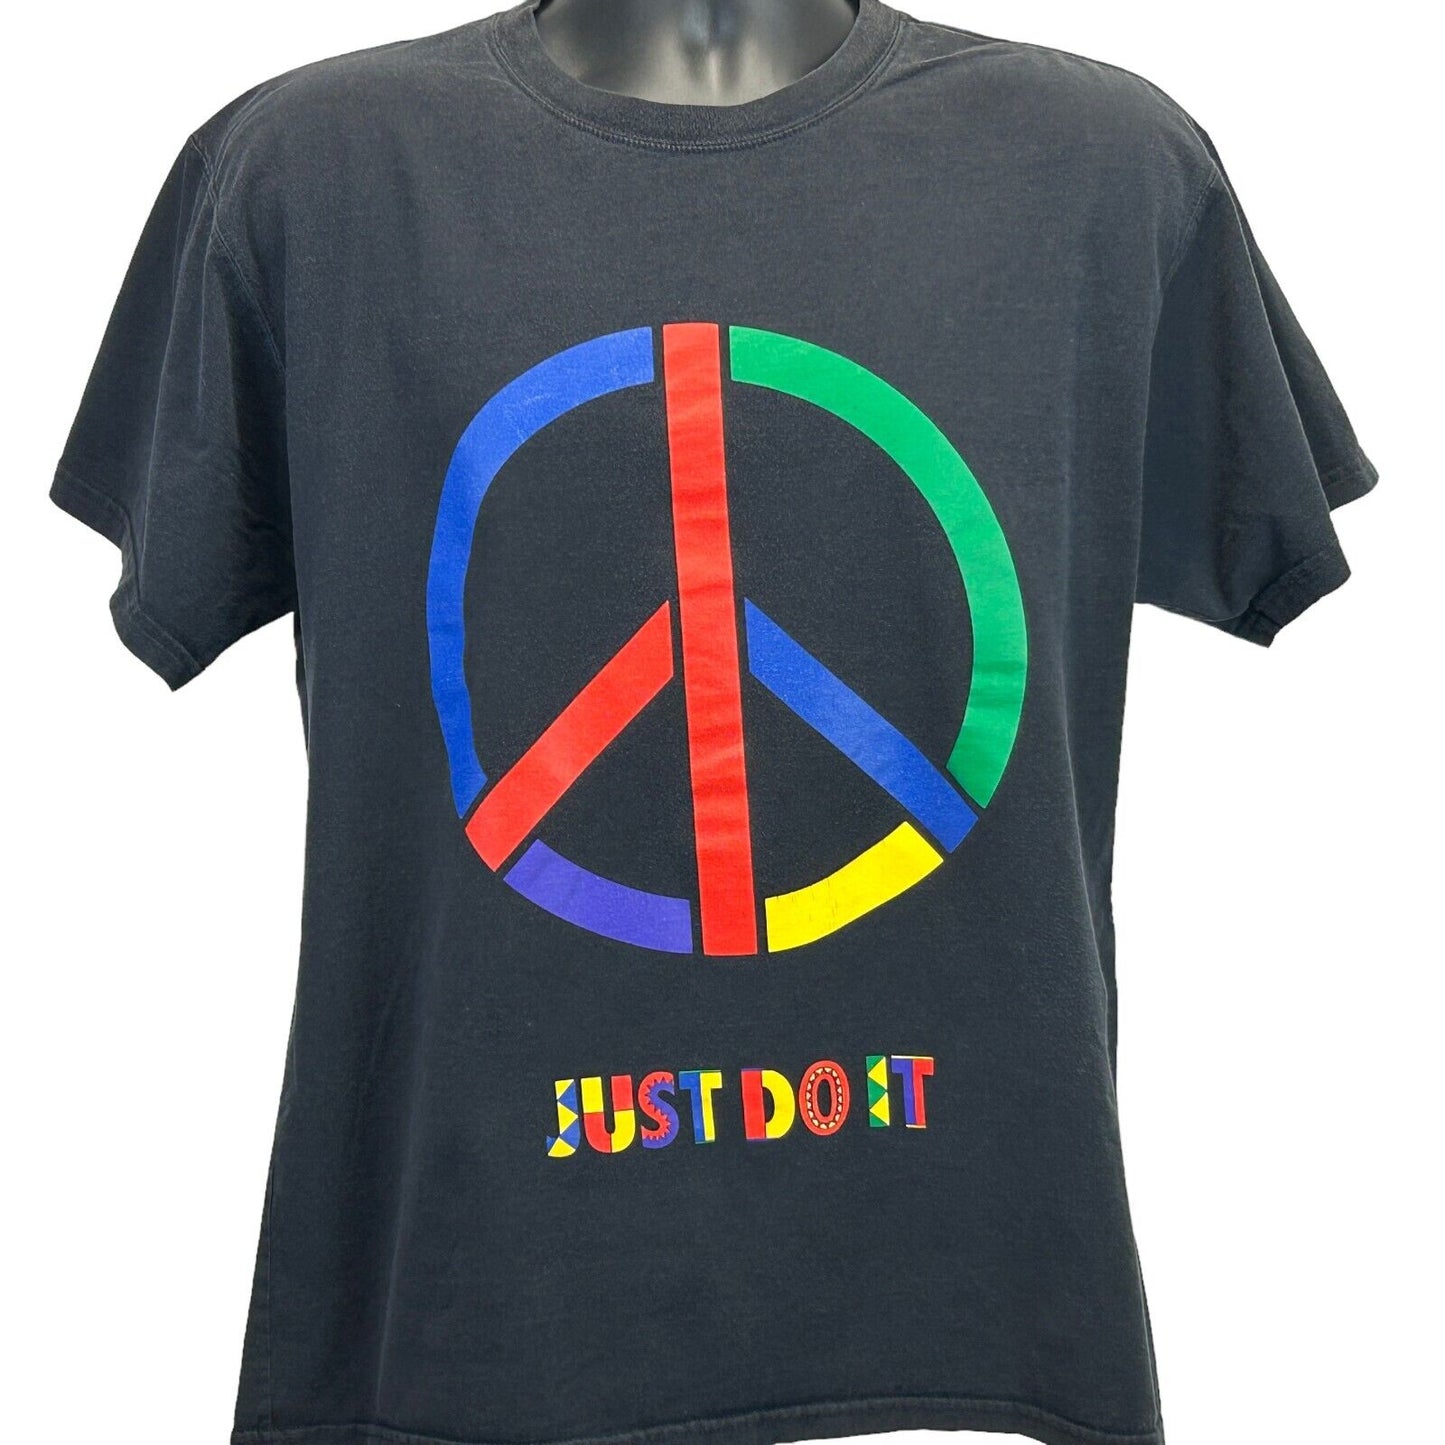 Nike Urban Jungle Peace Sign T Shirt Just Do It Gel Playground Black Tee Small